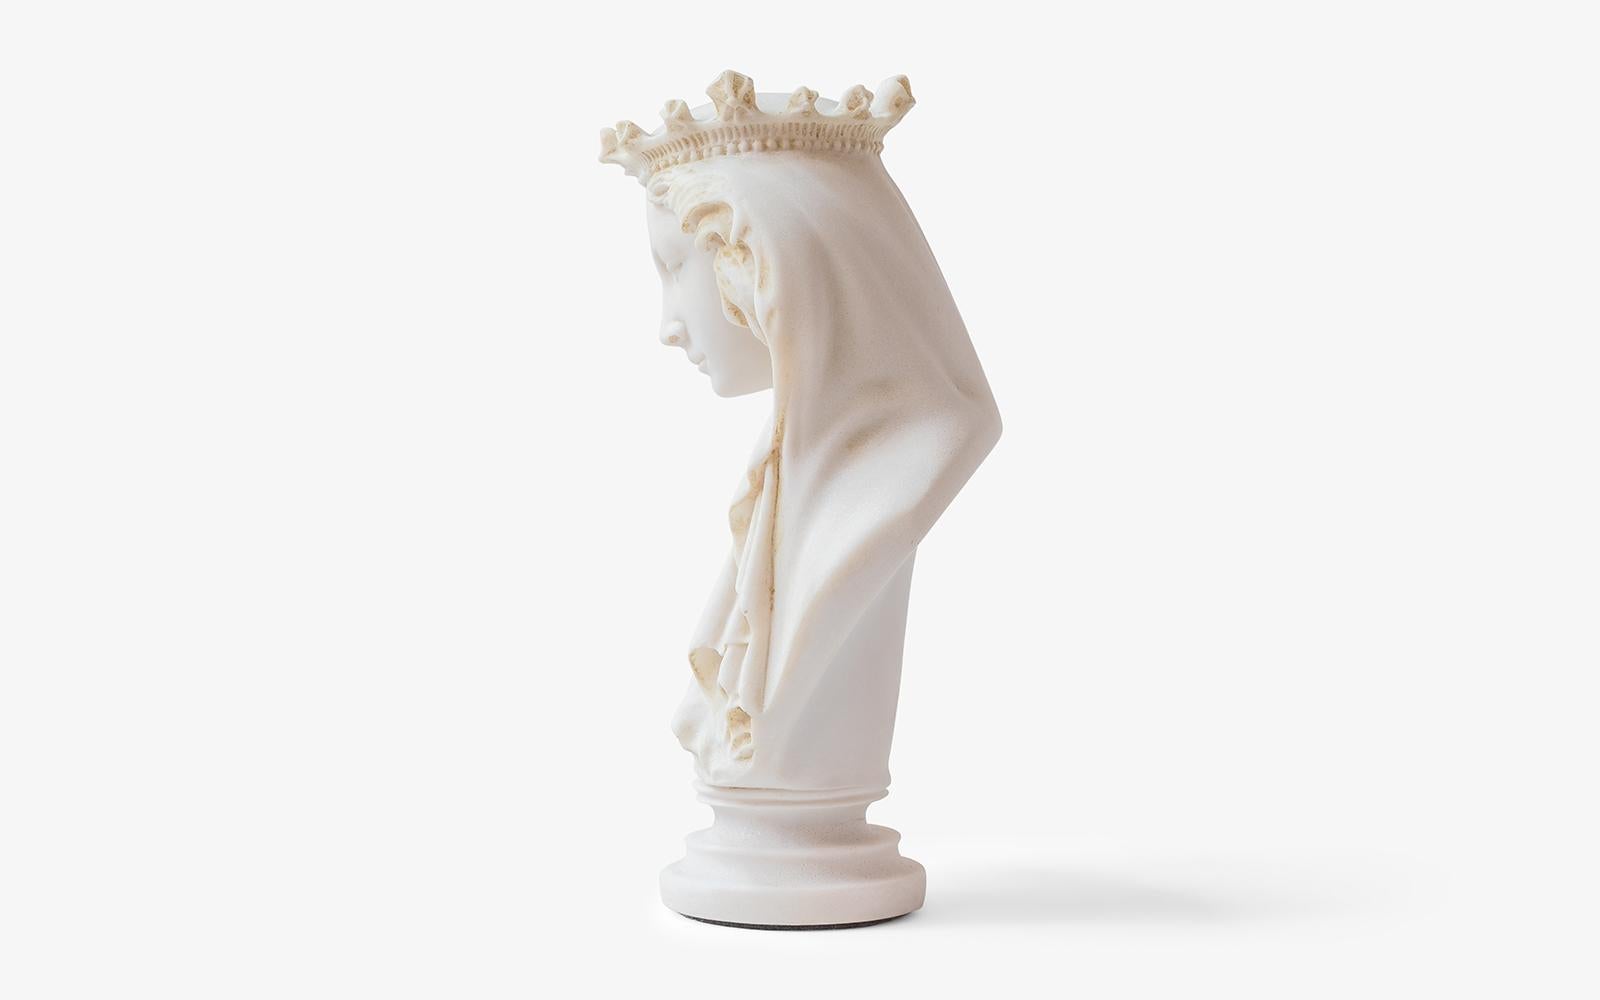 This sculpture depicts the Virgin Mary, who is known as the mother of Jesus in Christian mythology. Weighing 1.5 kg, this sculpture is produced from pressed marble powder and made using the original molds from the museum. It can be used both indoors